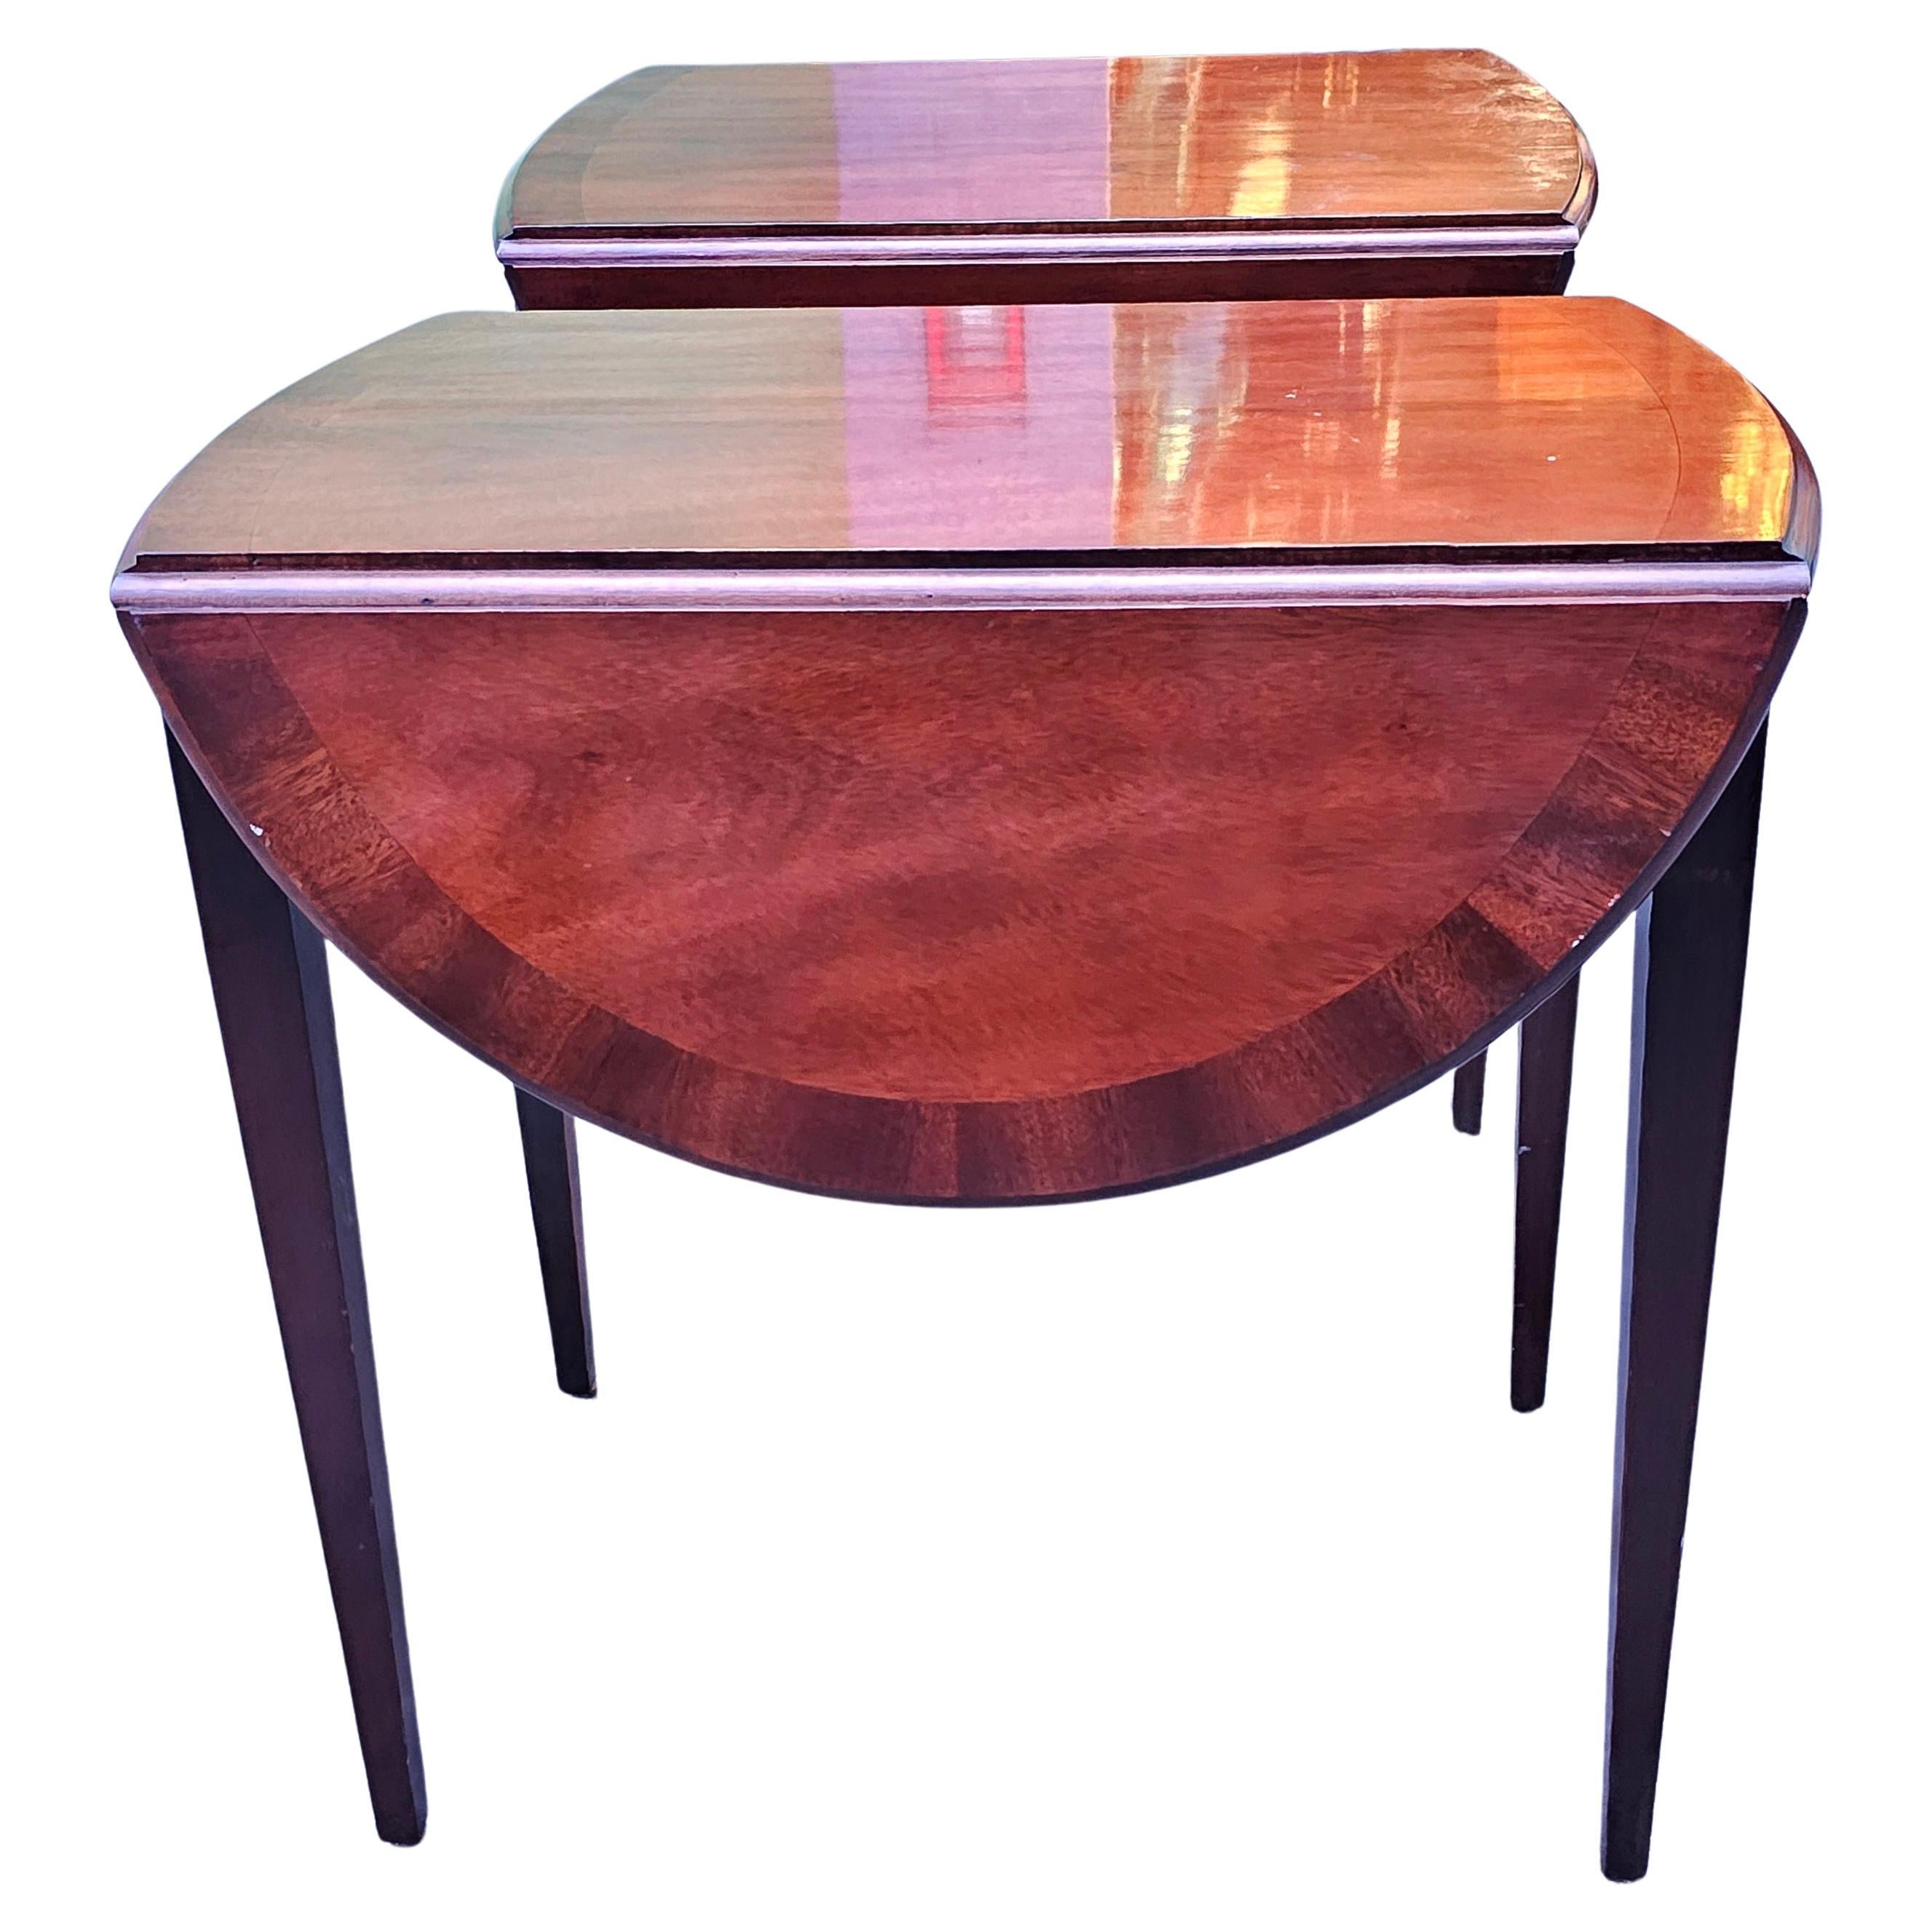 A Gorgeous Pair of Magogany Banded and Satinwood Inlaid Pembroke Drop-Leaf Side Tables in beautiful vintage condition. Feature a single drawer dovetail joints. Measure 20